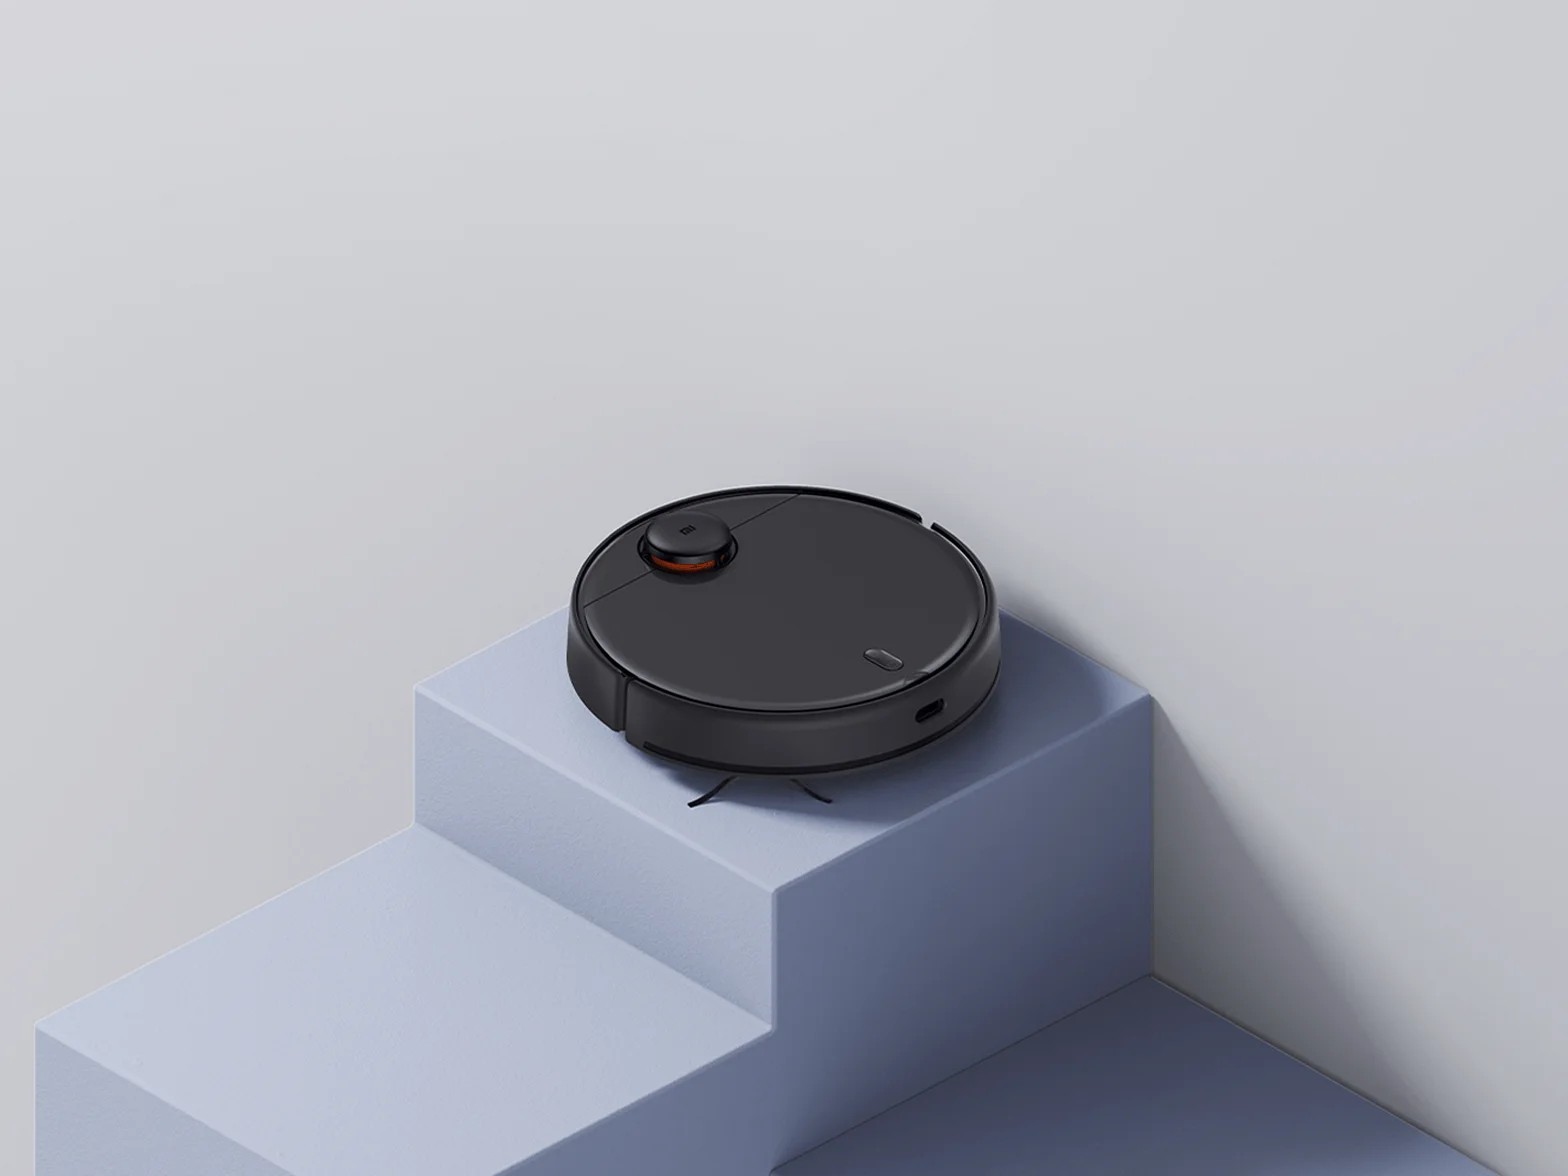 yarn Habitat iron Xiaomi Robot Vacuum Mop 2 Pro launches with 3,000 Pa suction power and  Professional Mopping Mode 2.0 - NotebookCheck.net News